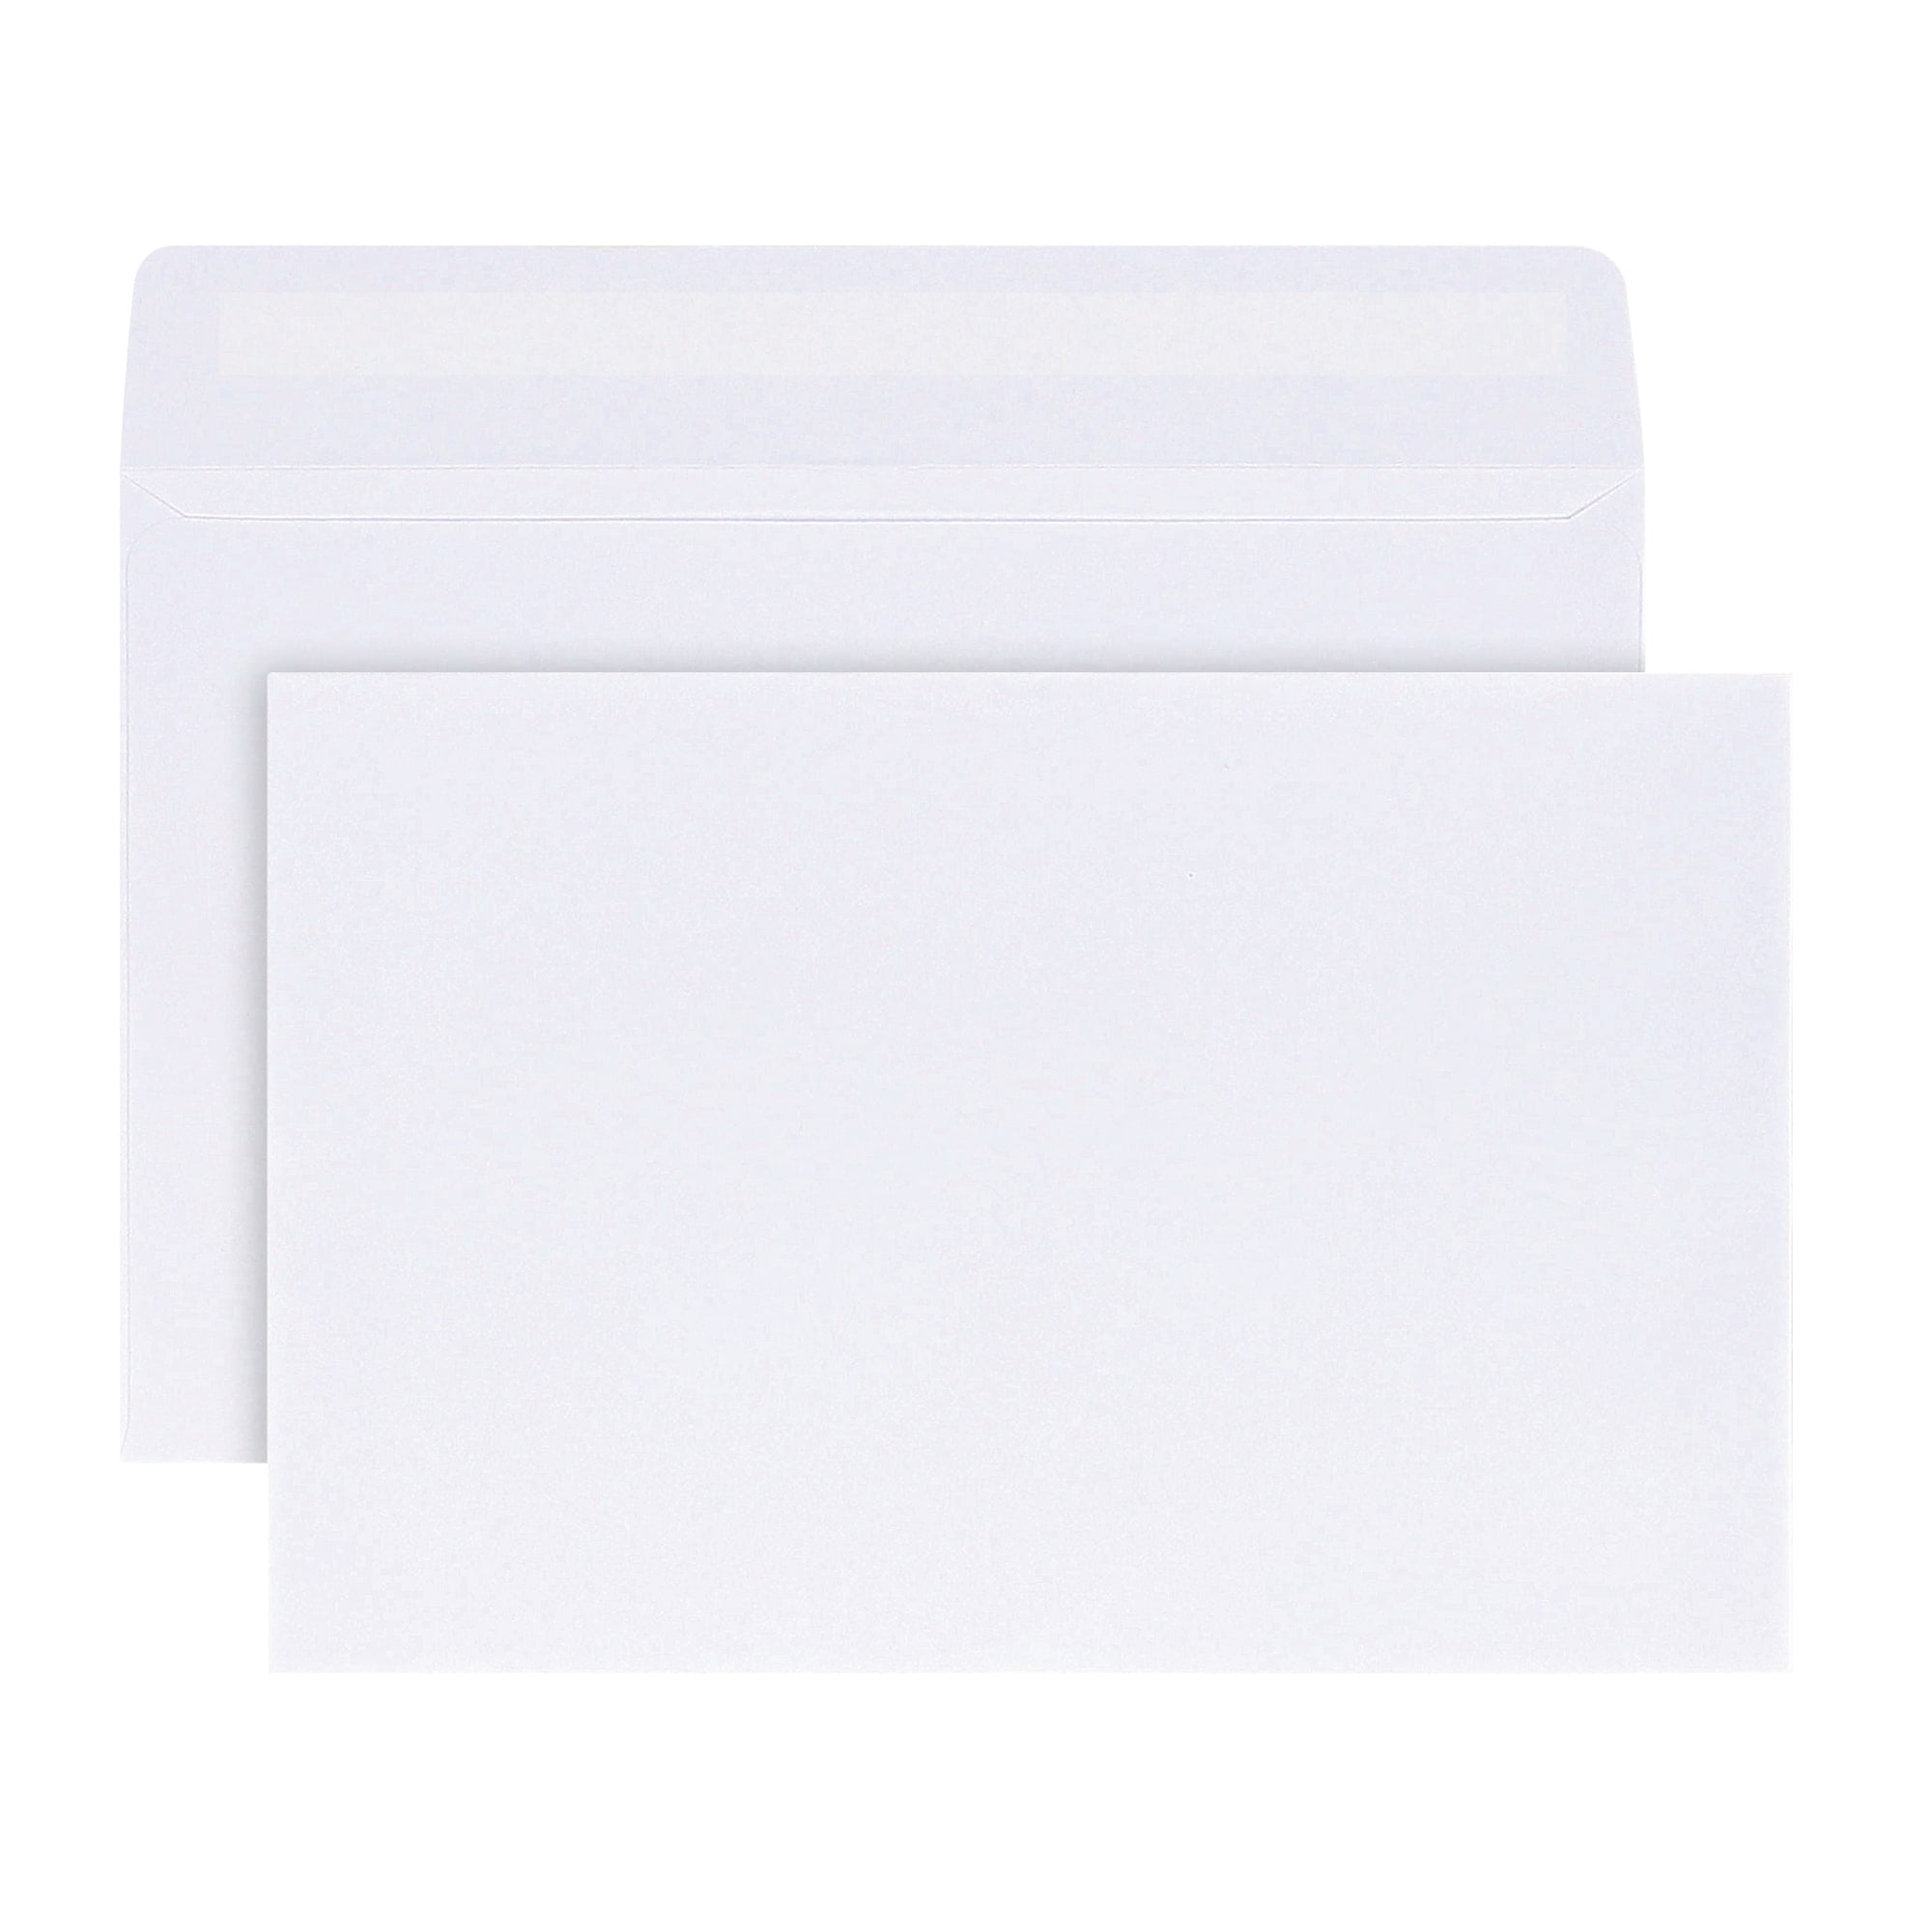 C5 Plain White Envelopes Peel and Seal for Cards Letters Invitations Craft A5 